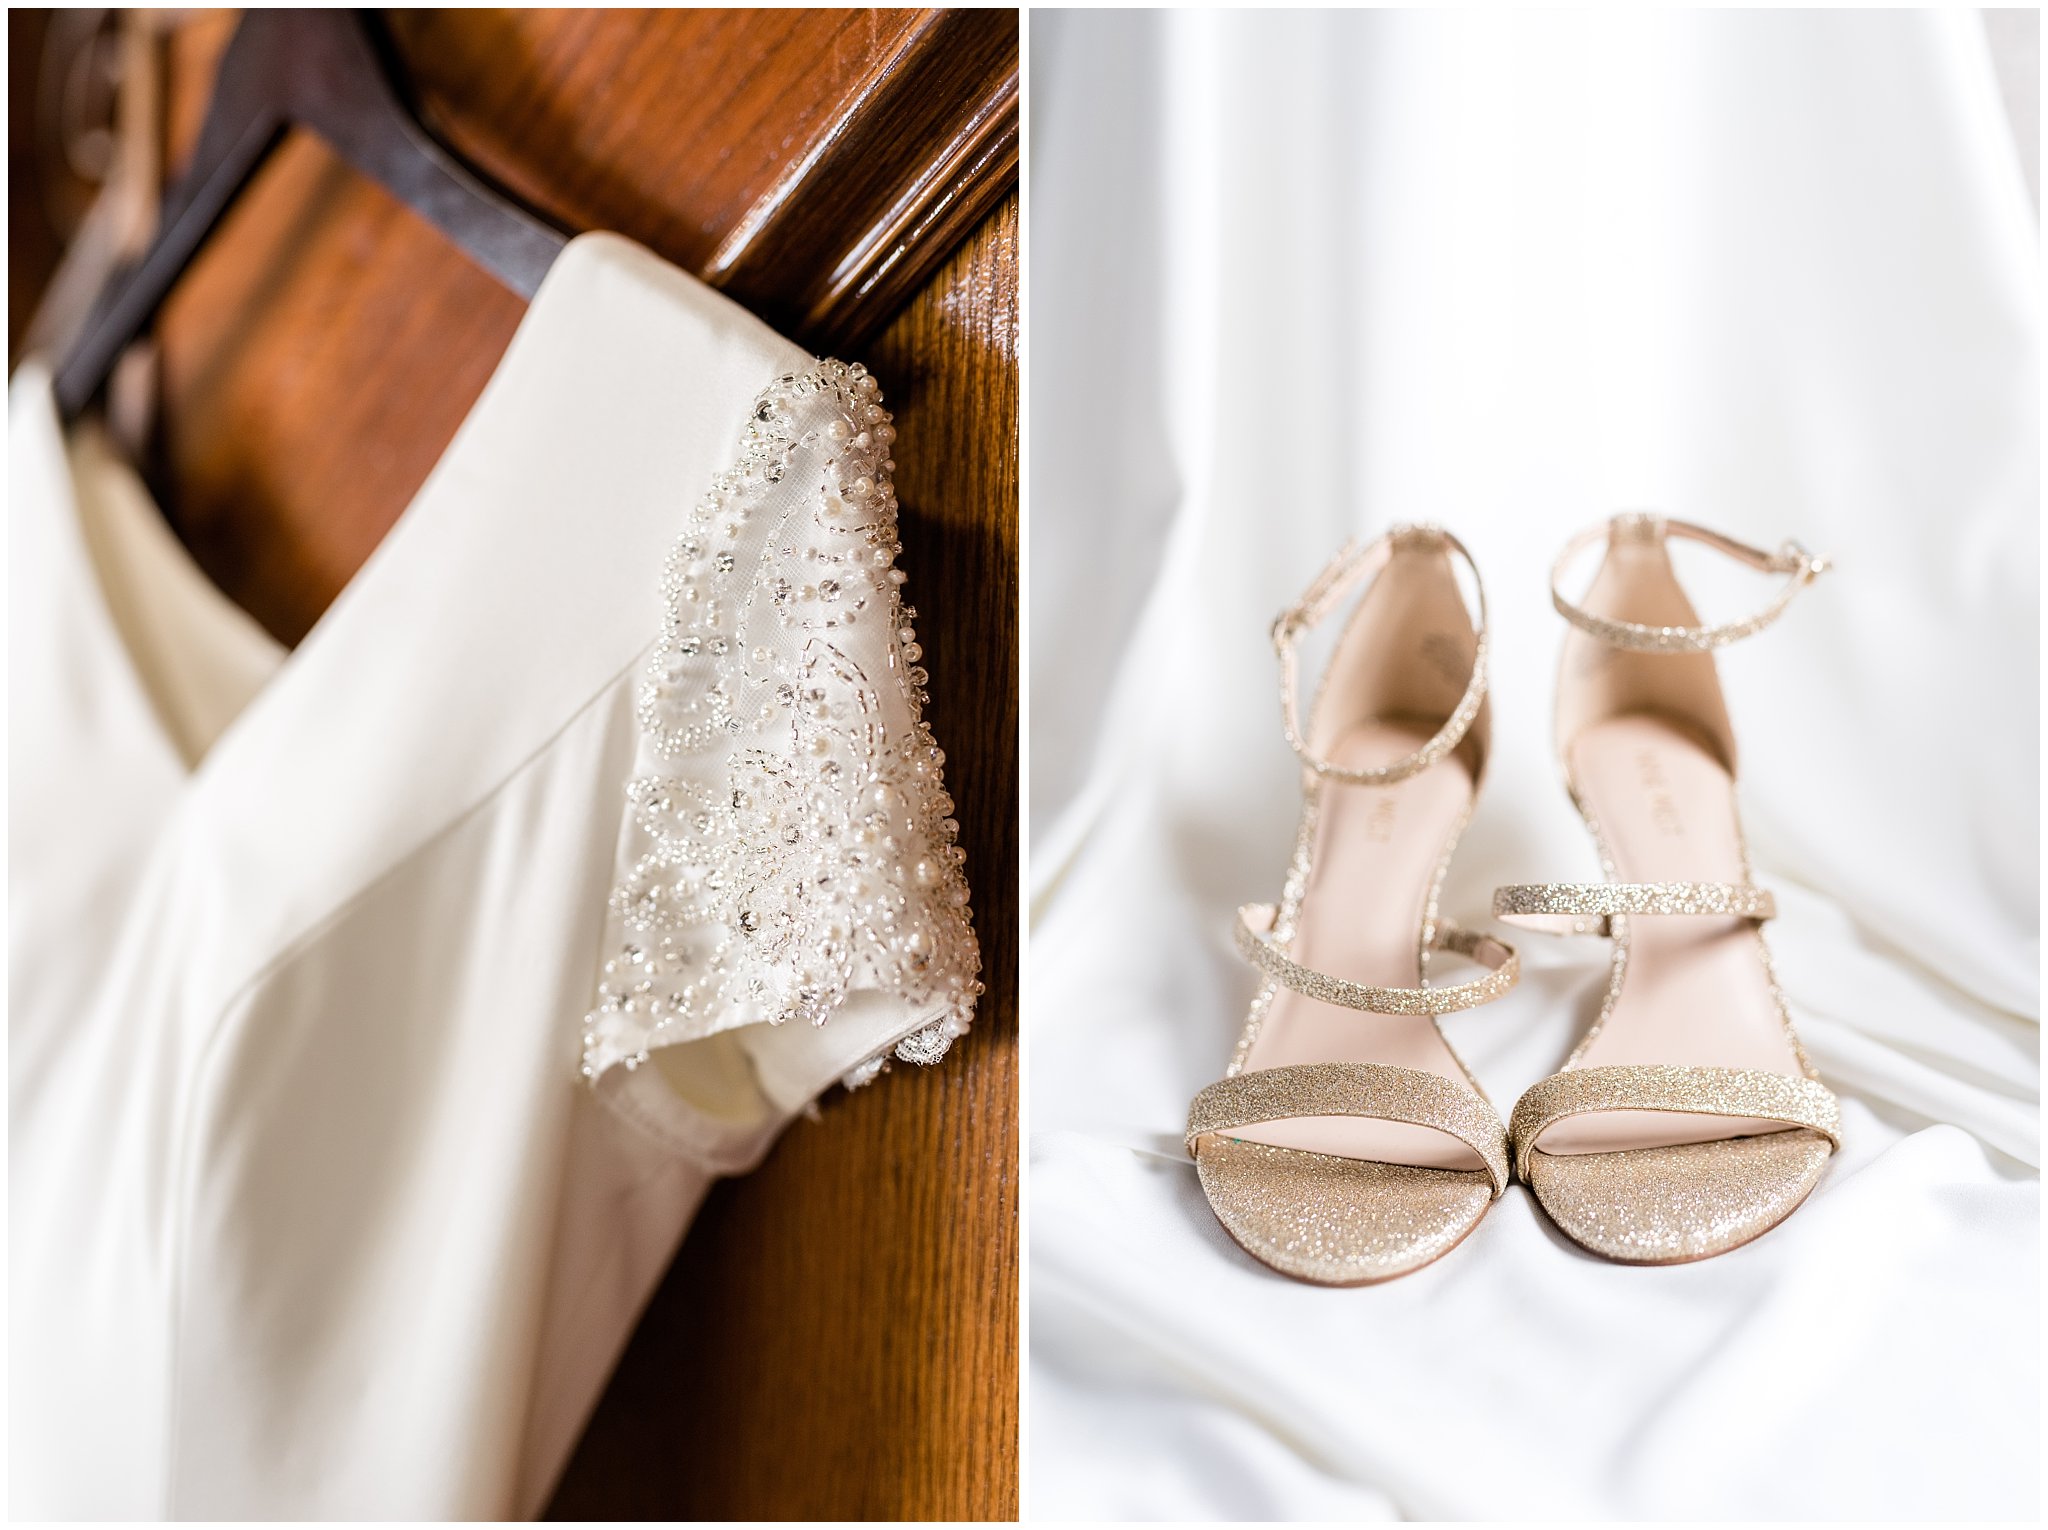 Boda Bridal wedding dress detail and open toe gold bridal shoes | Talia Event Center